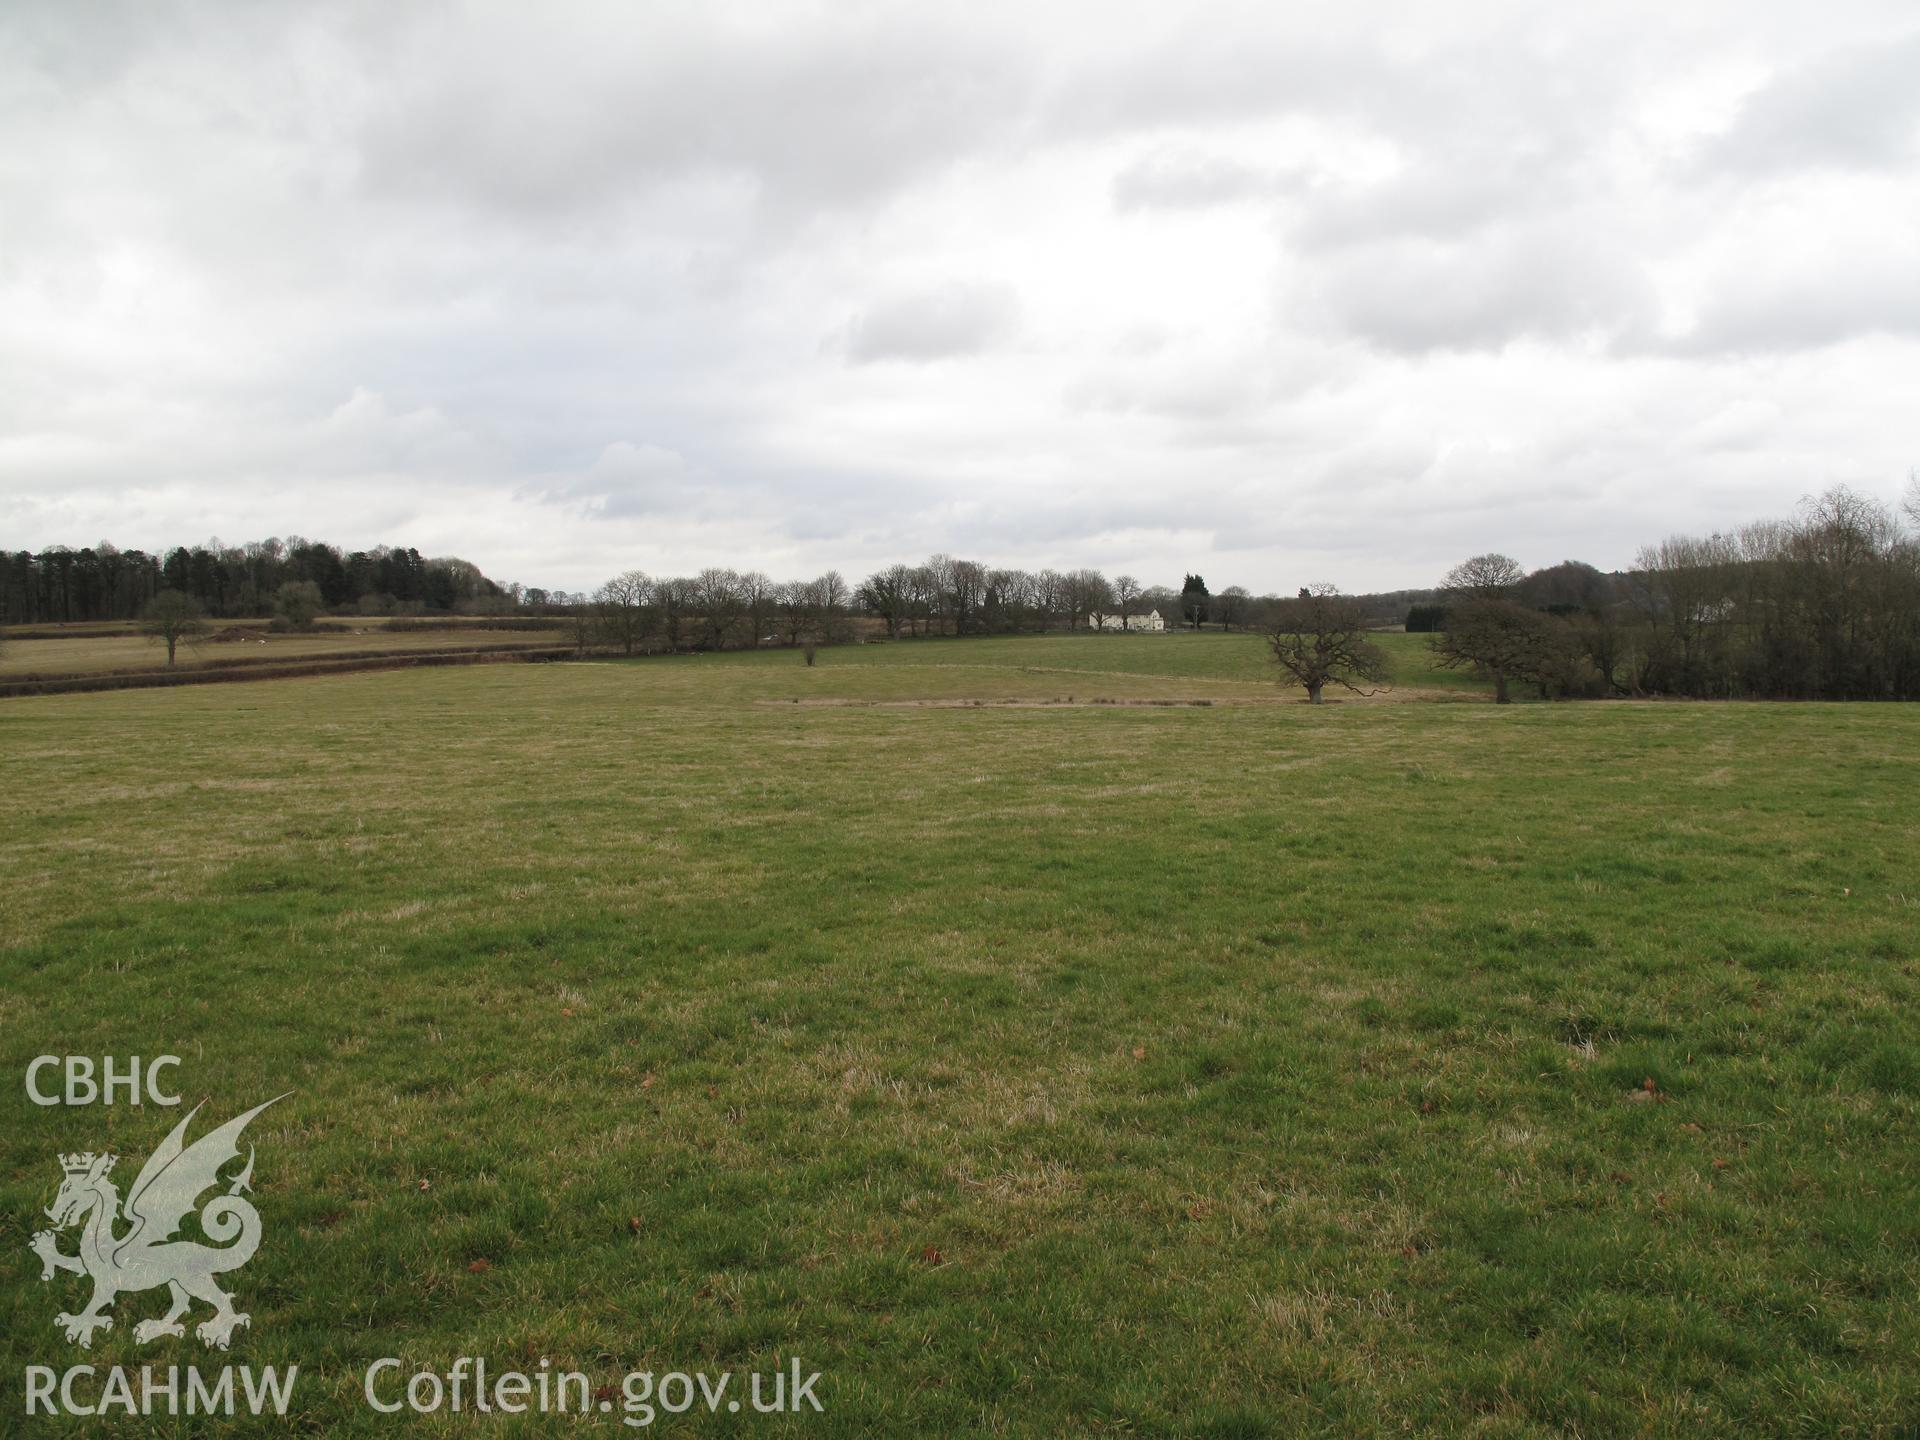 View of St Fagans battle site near Tregochas from the west taken by Brian Malaws on 27 February 2009.